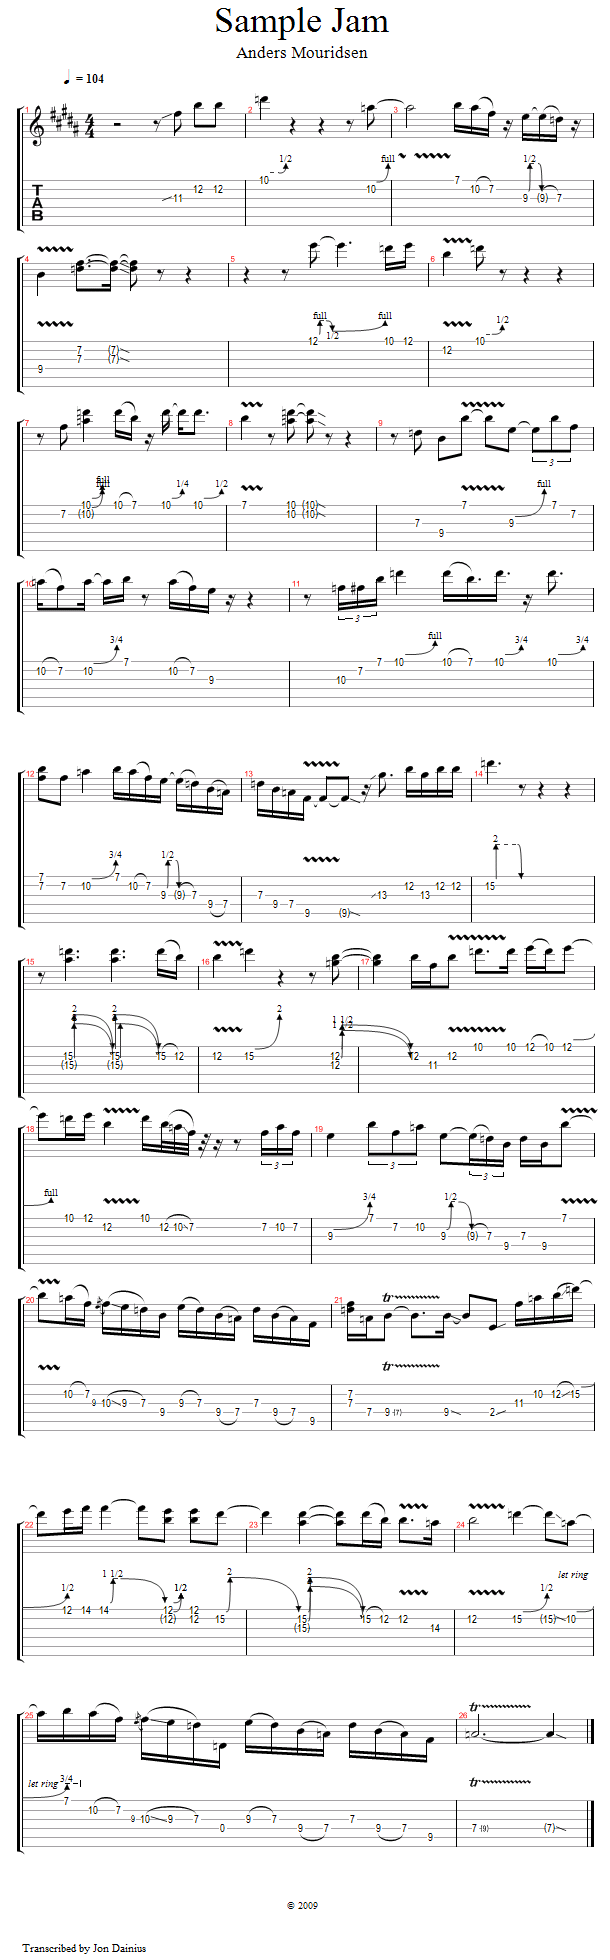 Lesson 7: Conclusion/Jam song notation